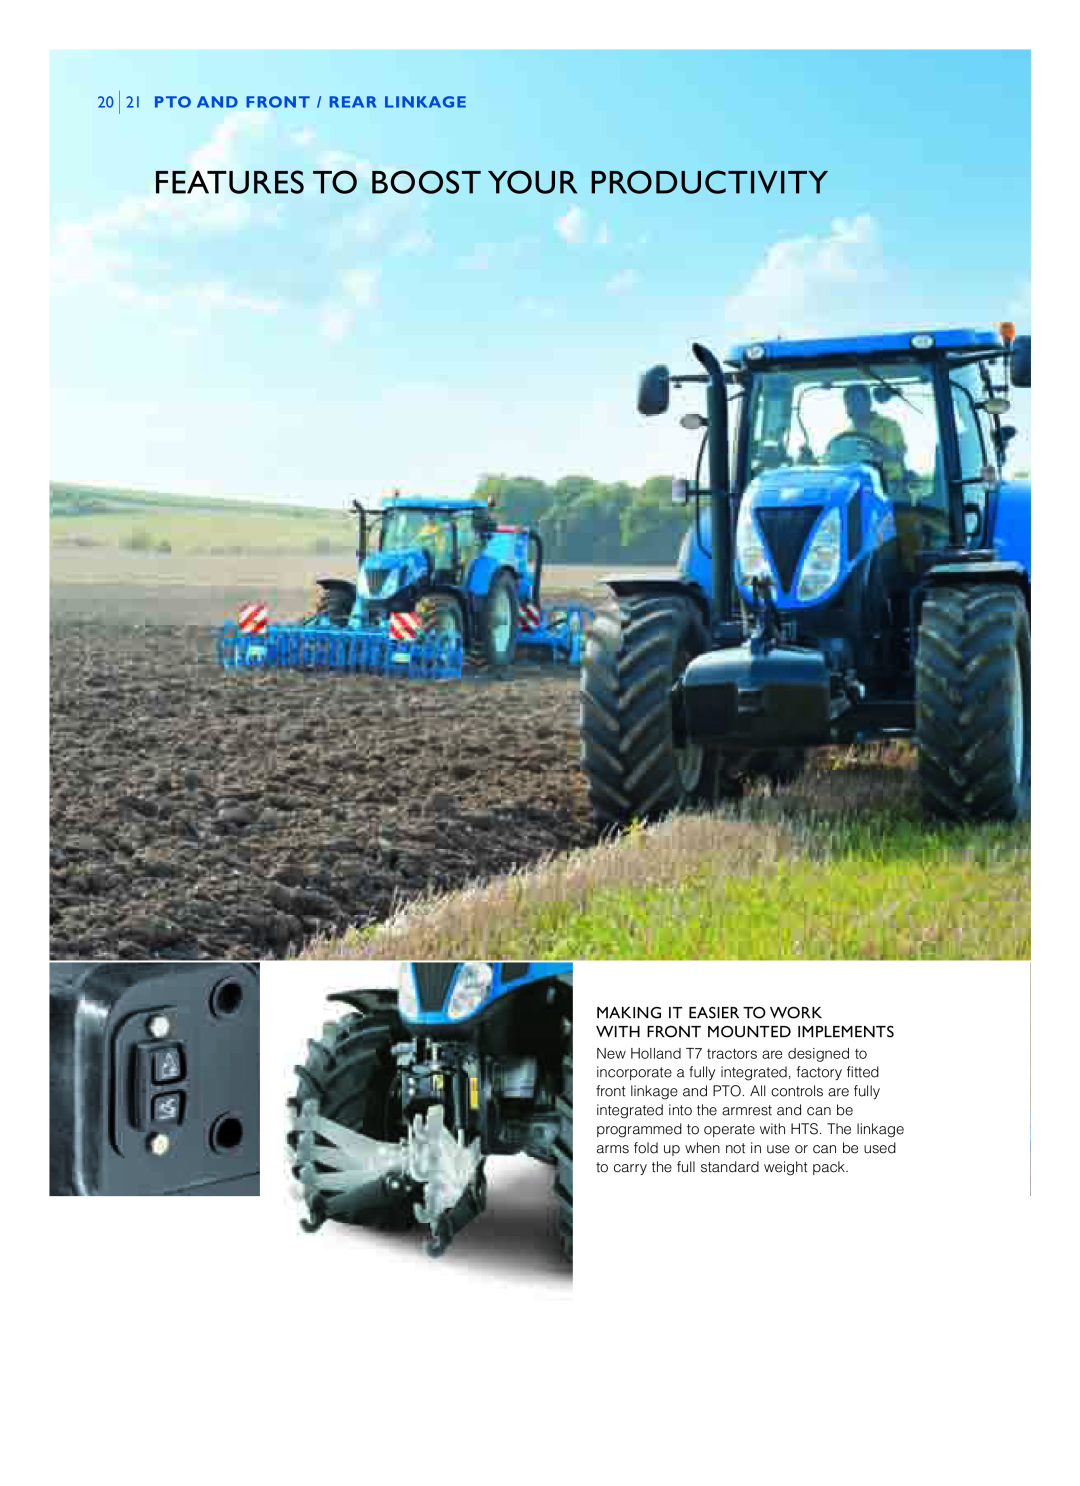 New Holland T7.185, T7.270, T7.260, T7.210, T7.235 Features To Boost Your Productivity, 20 21 PTO AND FRONT / REAR LINKAGE 